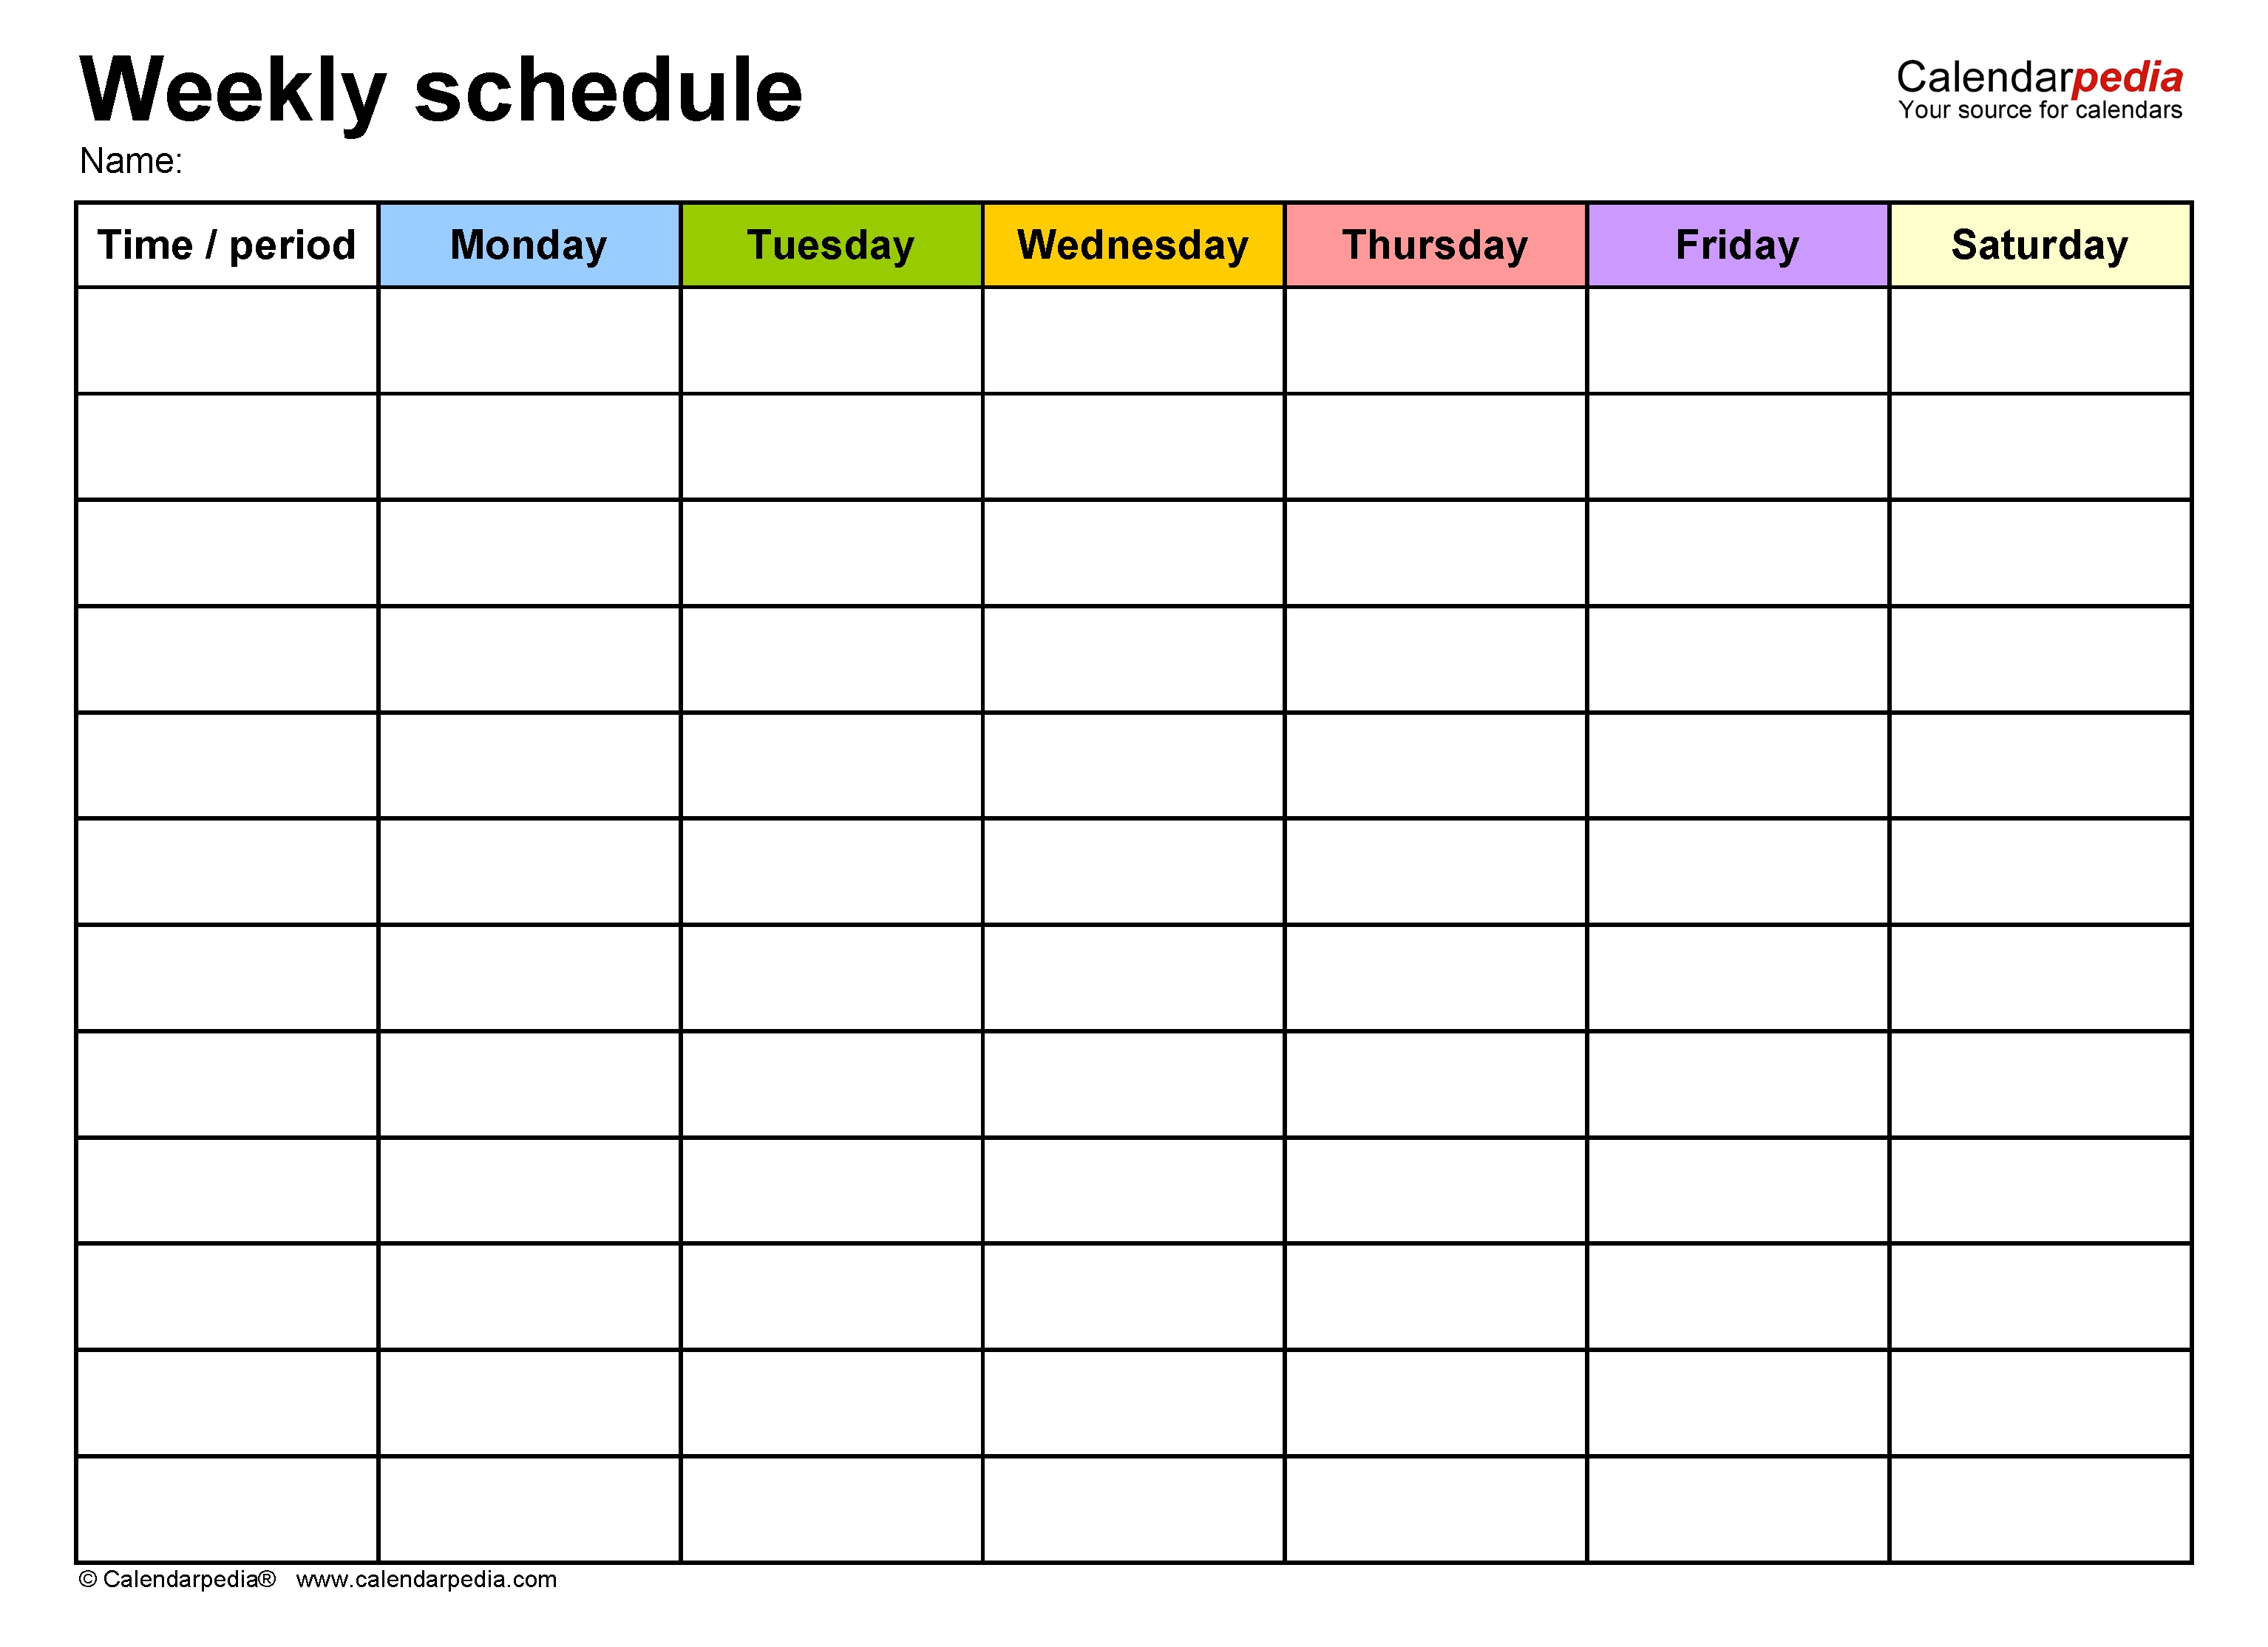 Free Weekly Schedule Templates For Word - 18 Templates-Blank 7 Day Calendar Template